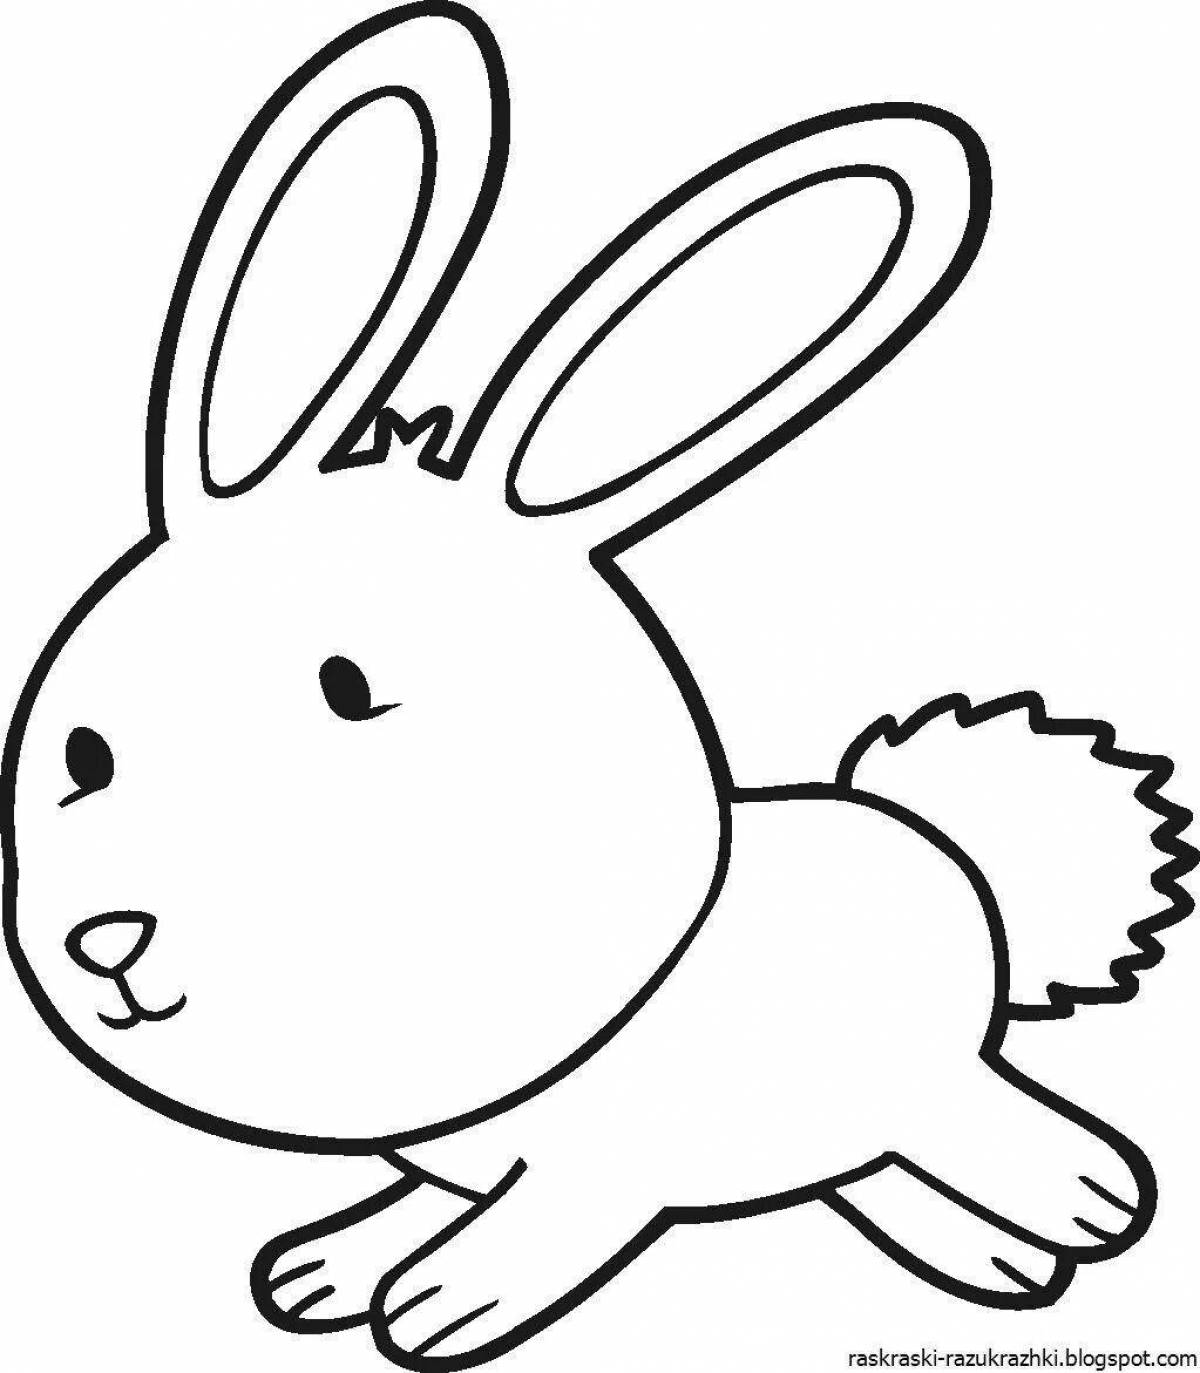 Fabulous bunny coloring book for kids